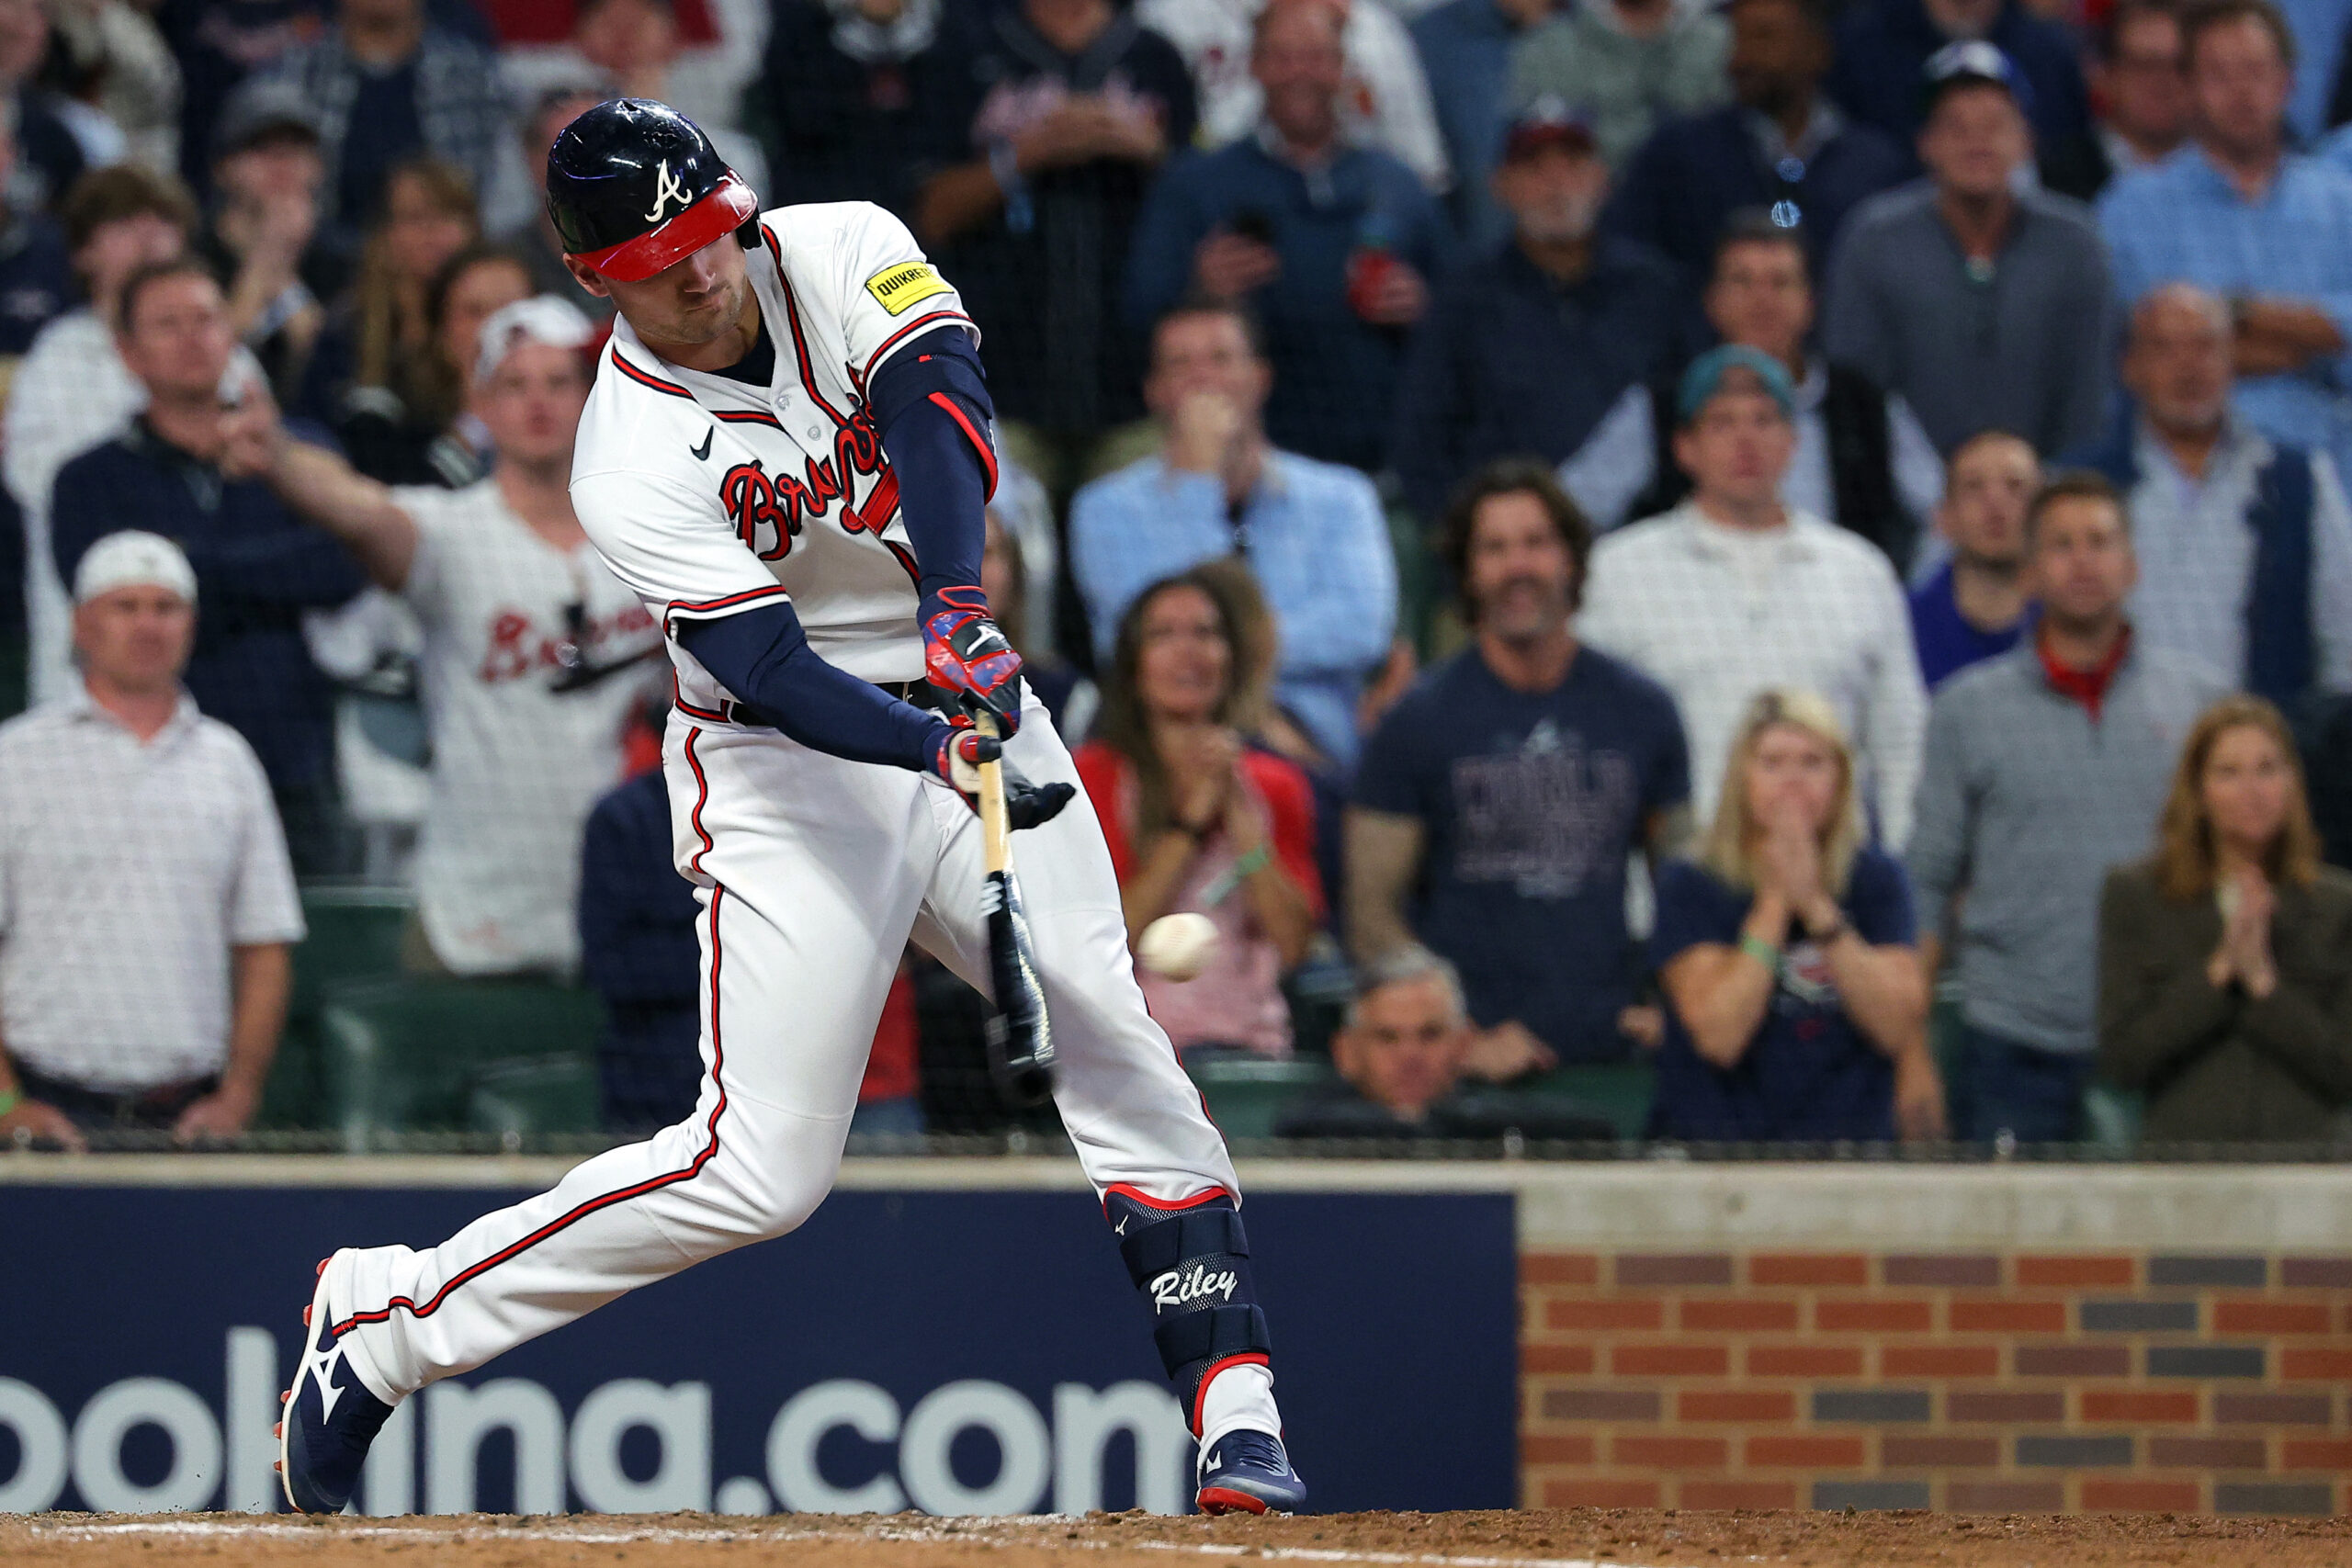 Photos: Home runs lift Braves to win in Game 4 of the World Series